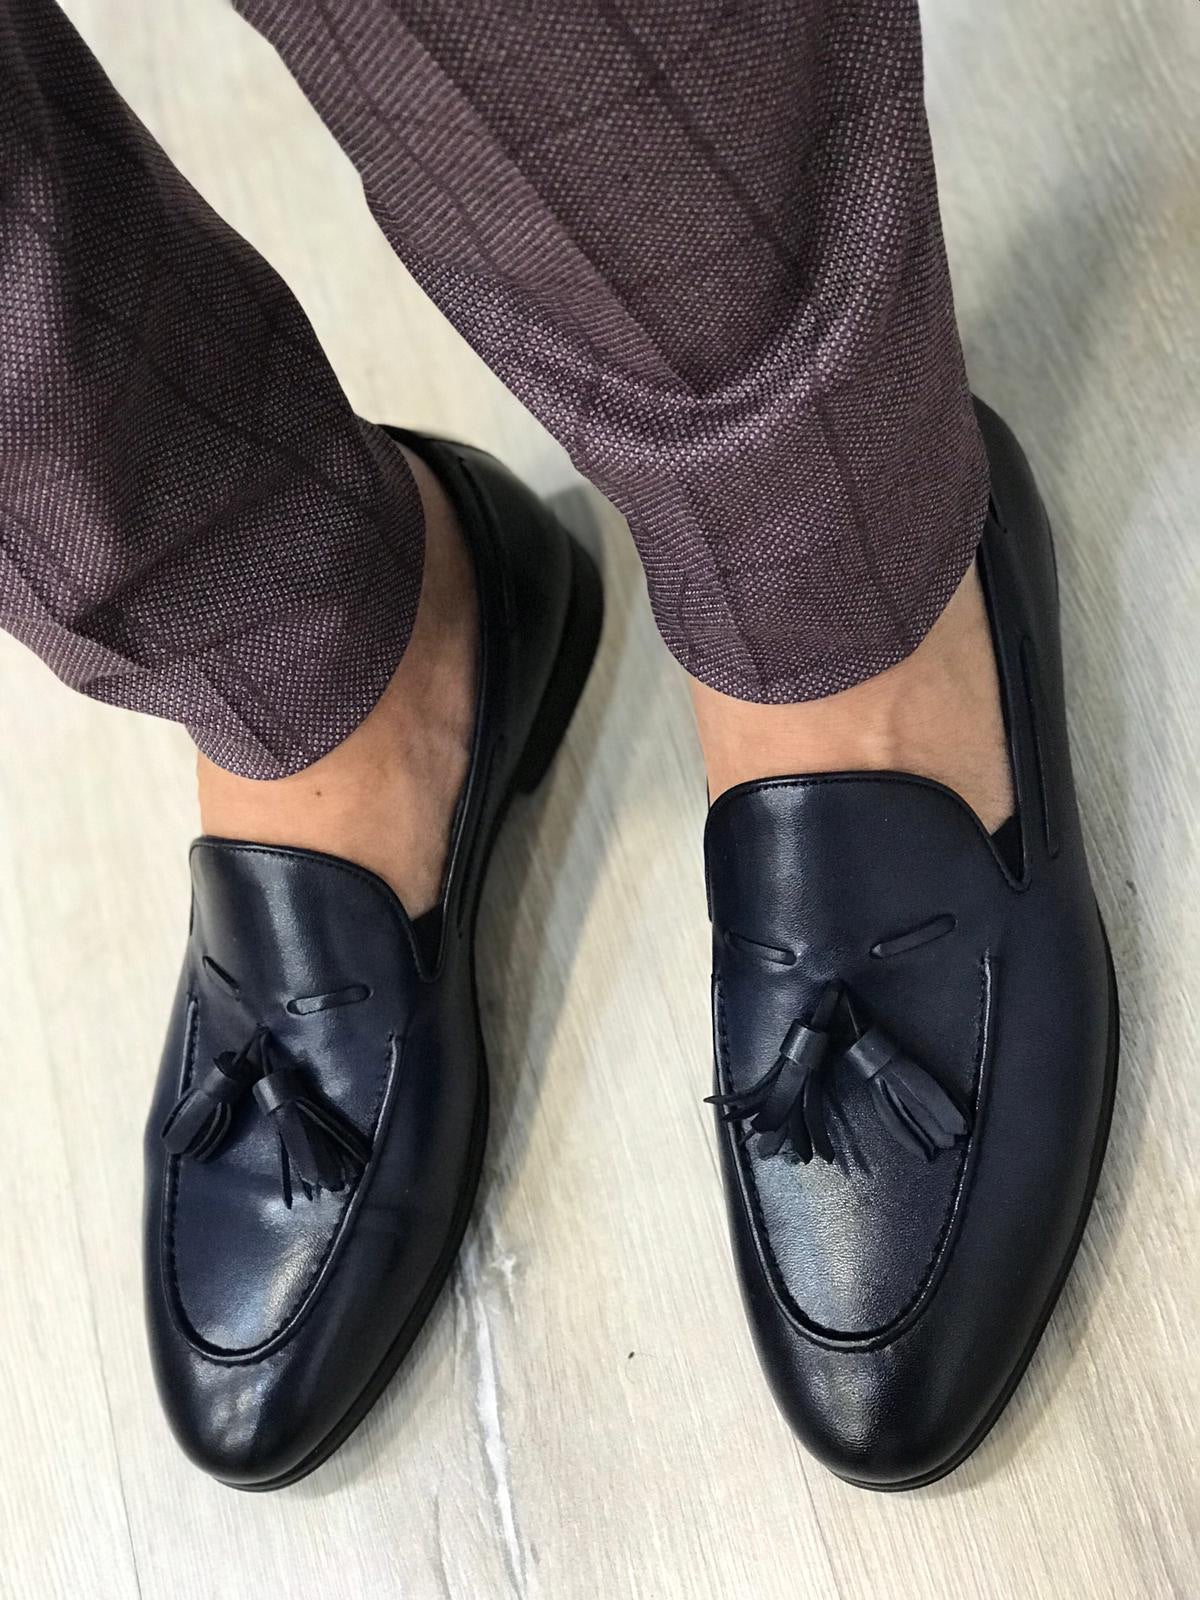 Tassel Leather Navy Loafers